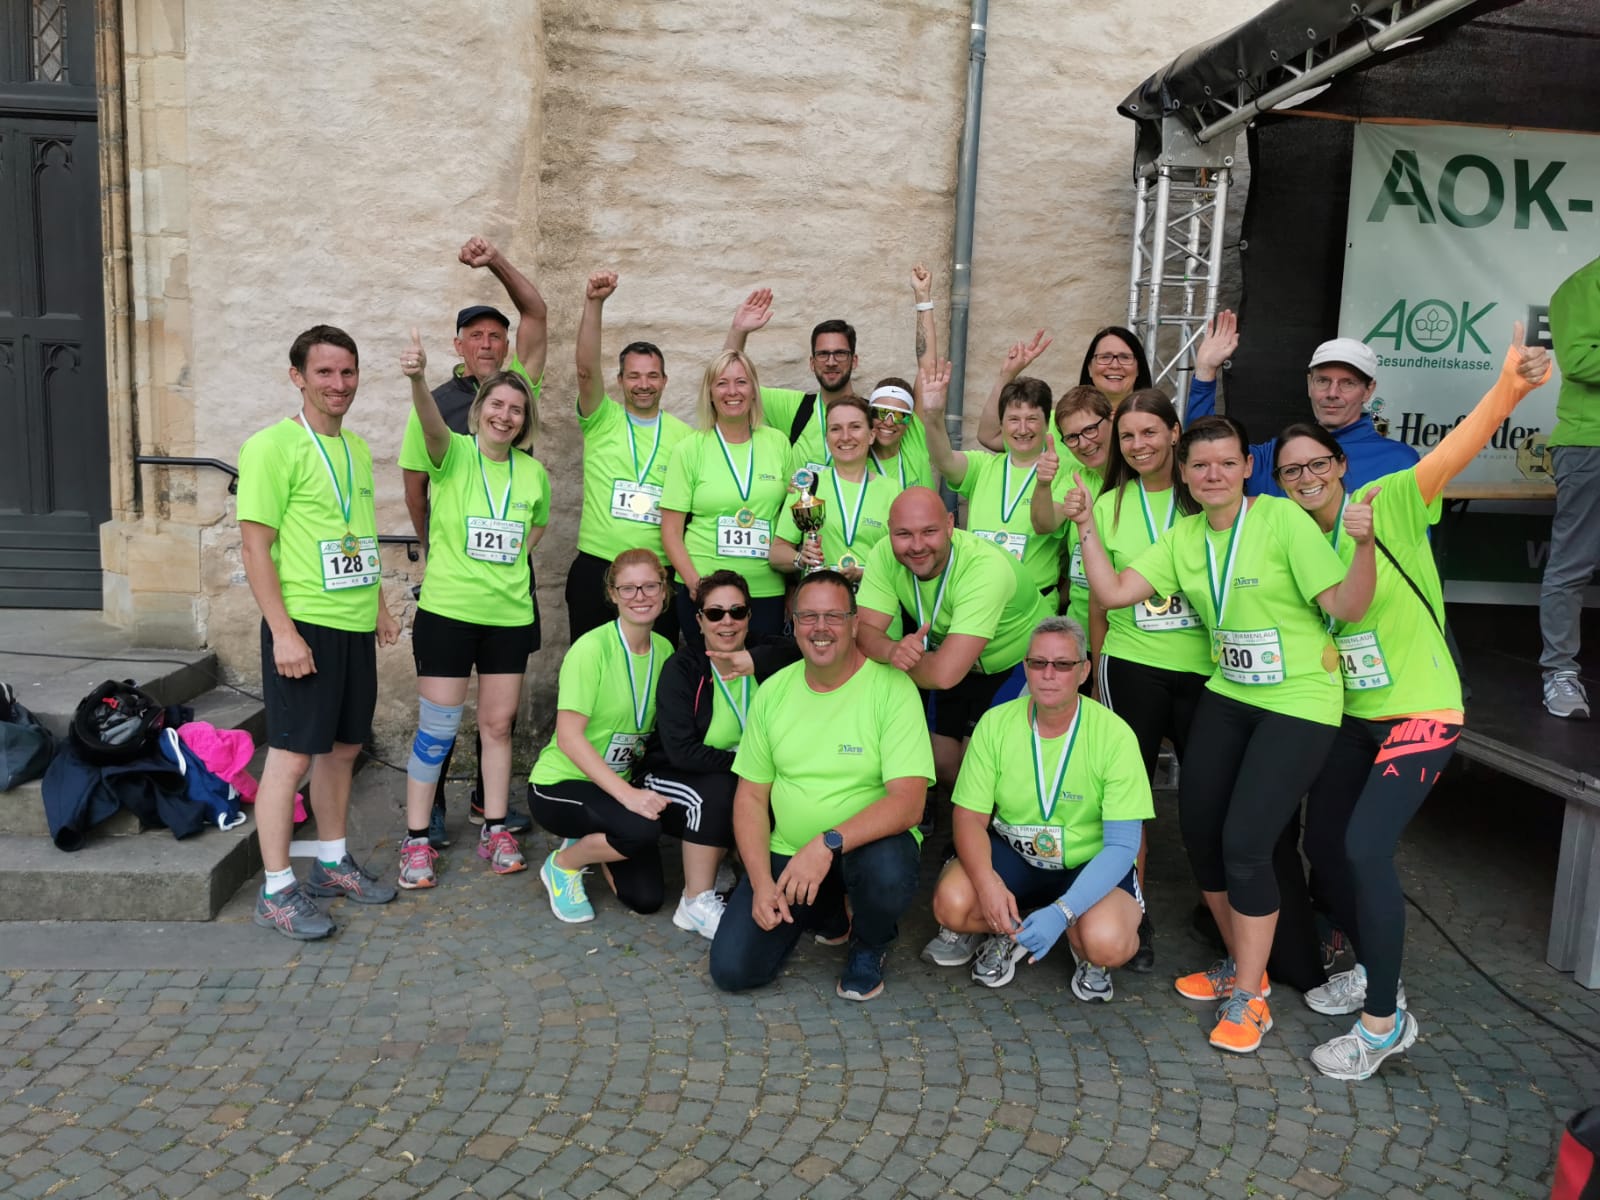 The AOK company run in Herford. ATB took part